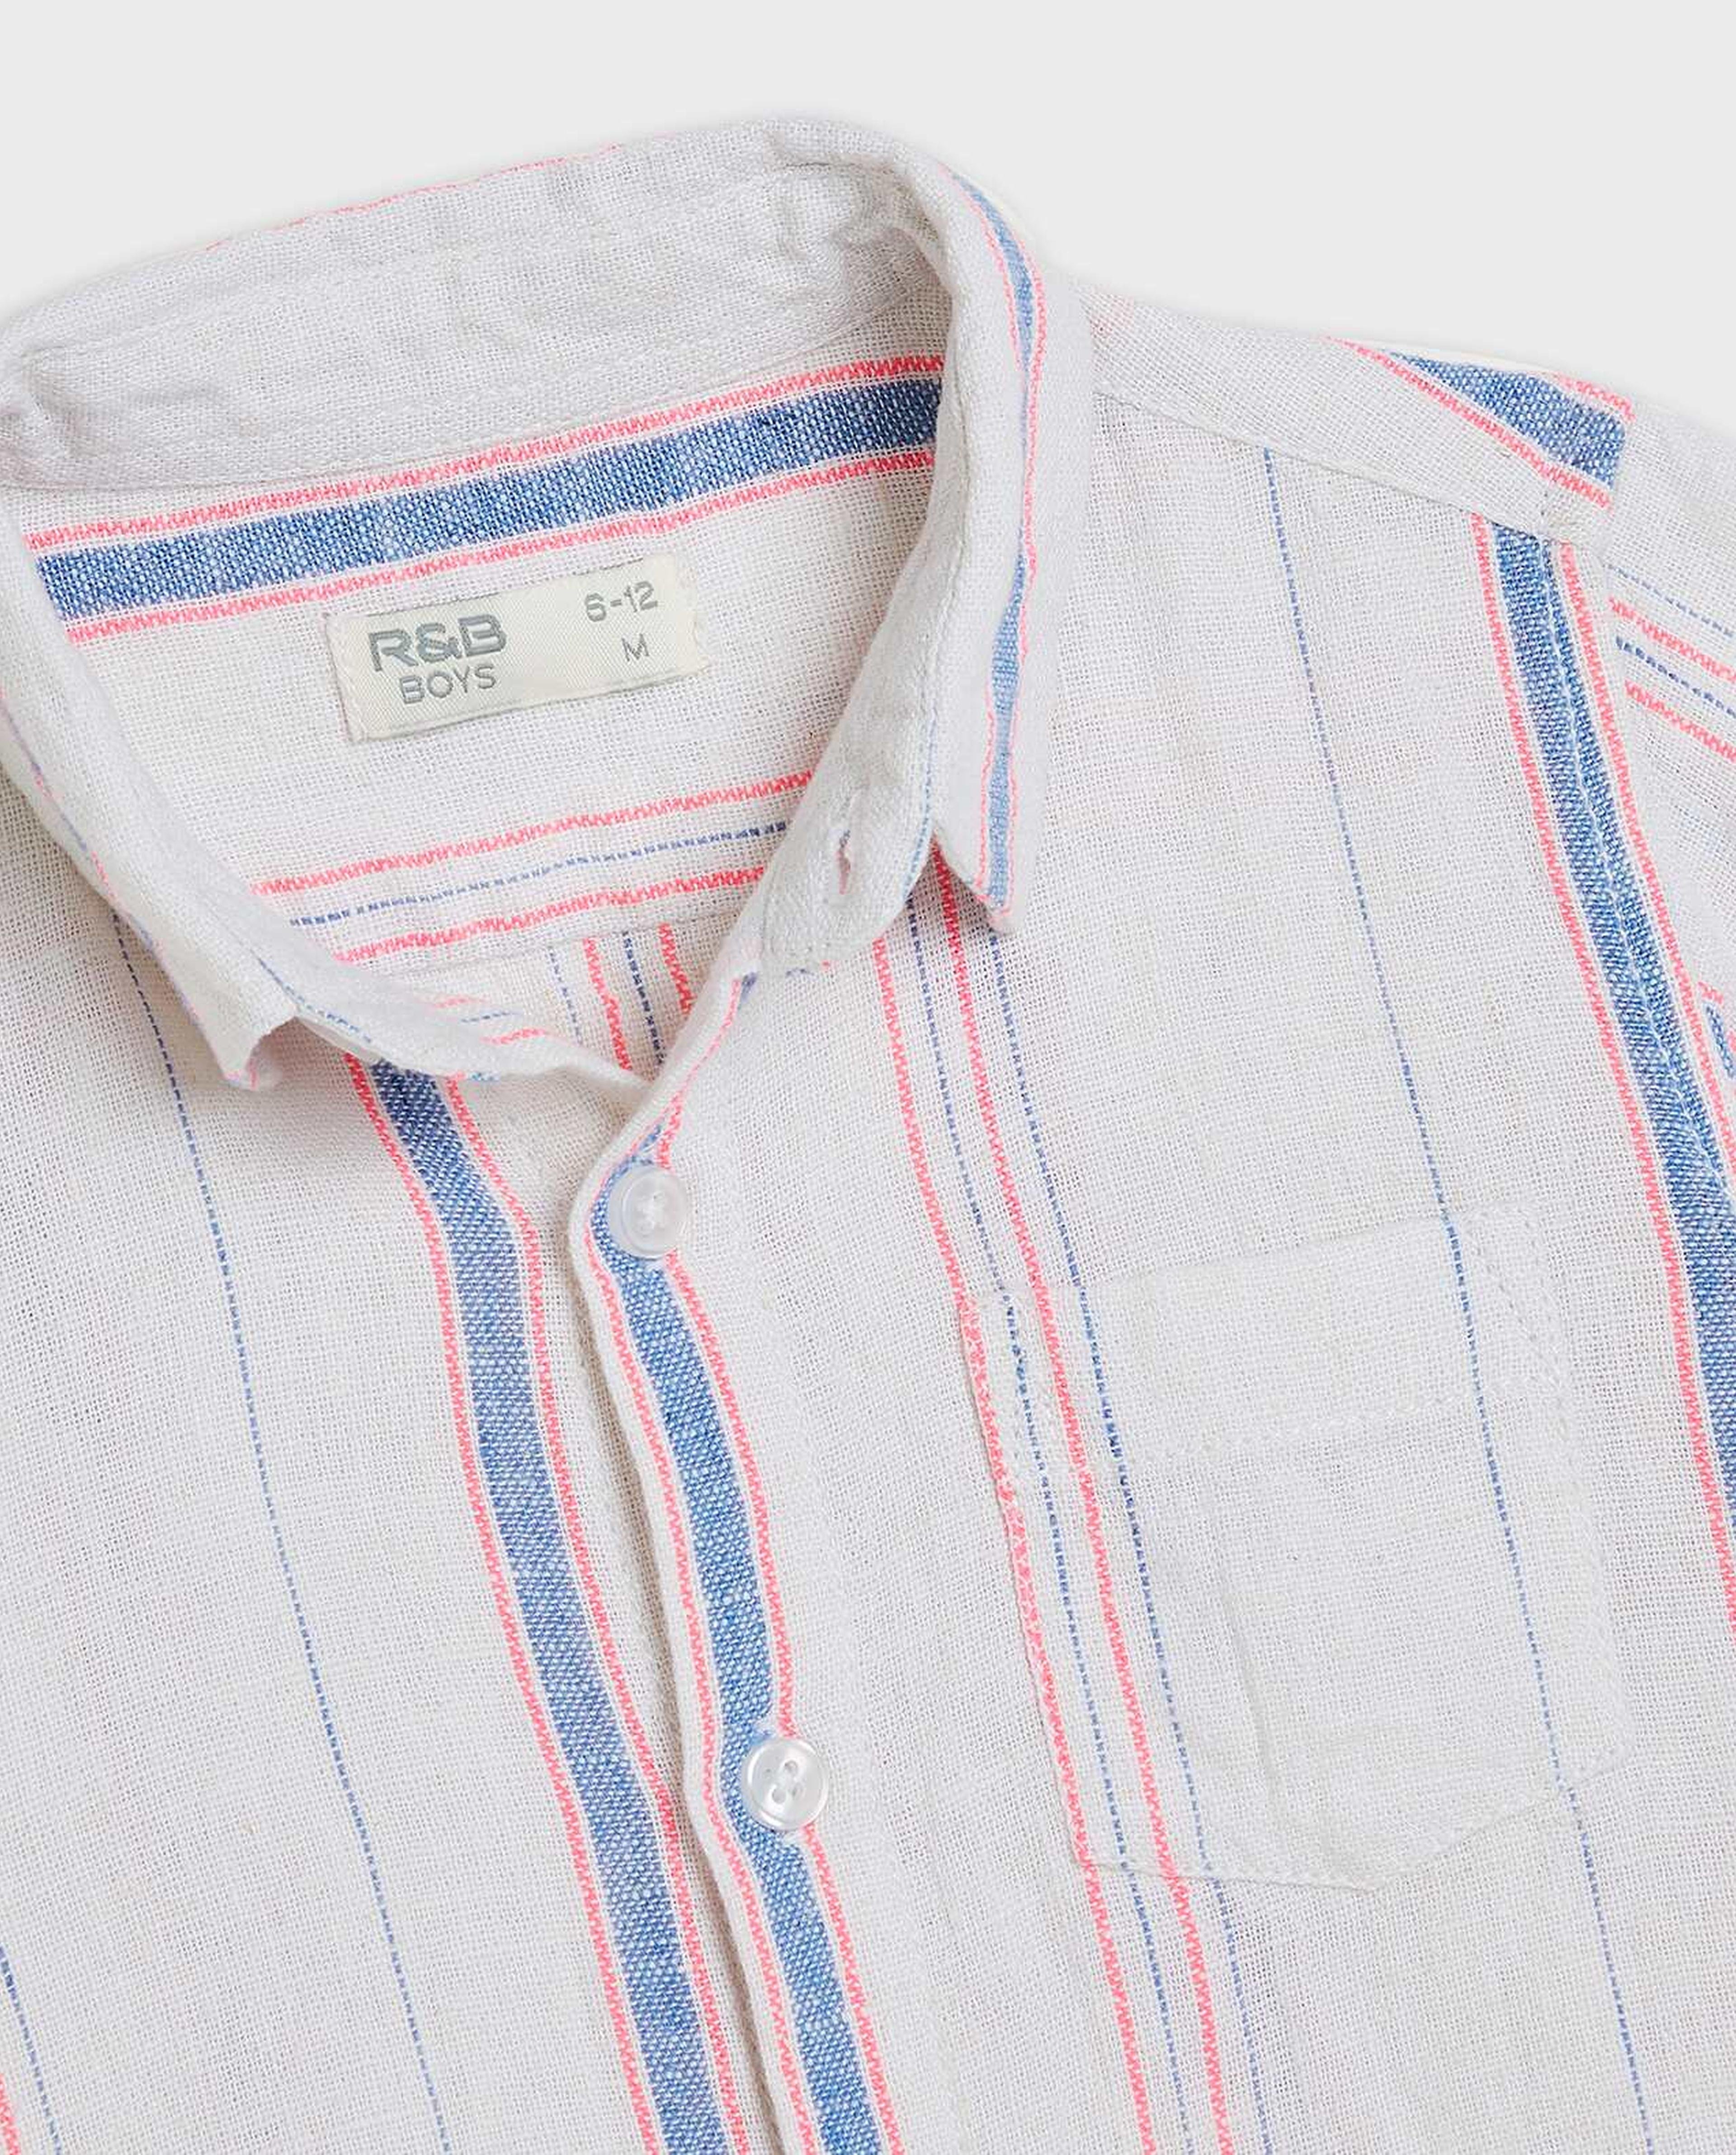 Striped Shirt with Classic Collar and Short Sleeves